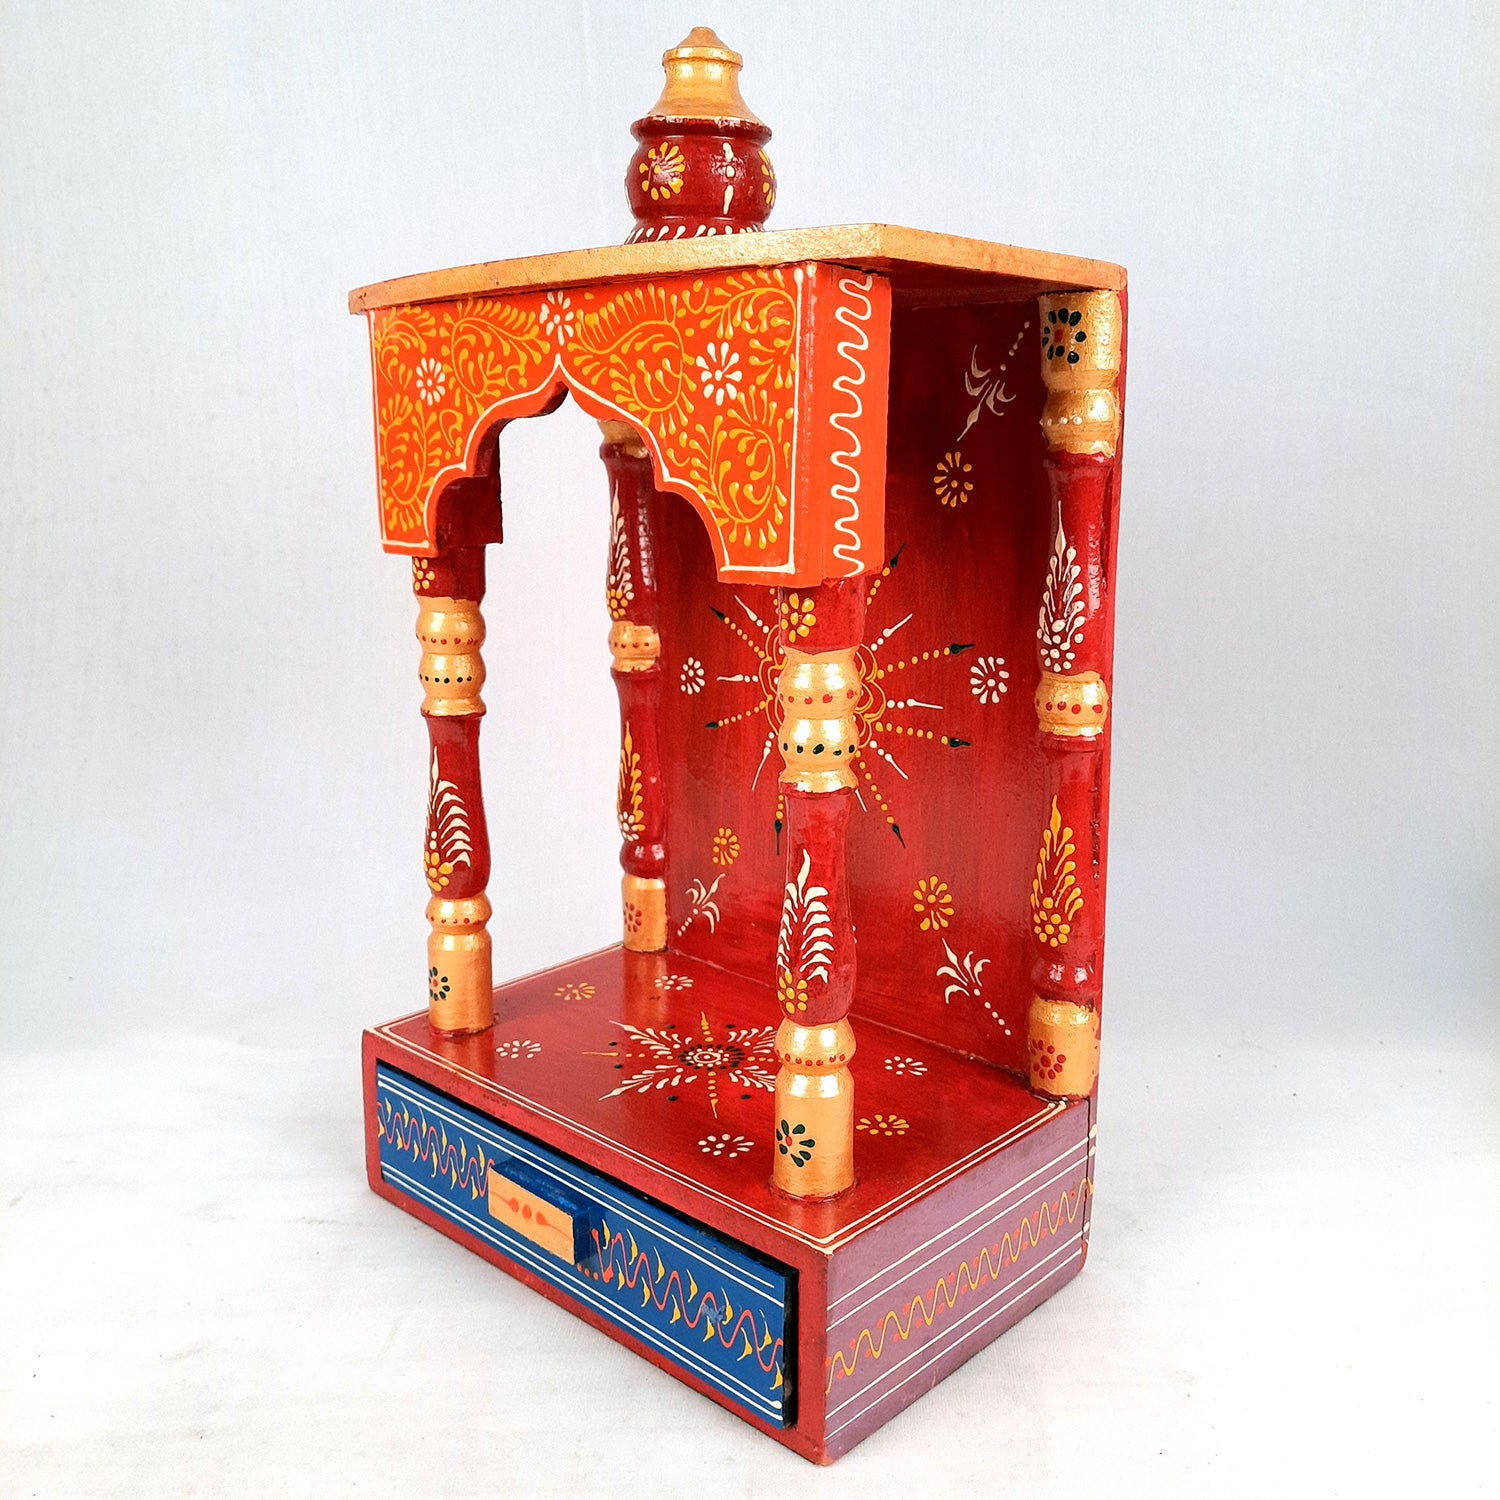 Pooja Temple with In Built Storage Drawer | Mandap For God |Puja Mandir Wall Mount - For Home , Puja Room, Office & Gifts - 15 Inch - Apkamart #Style_Style 1